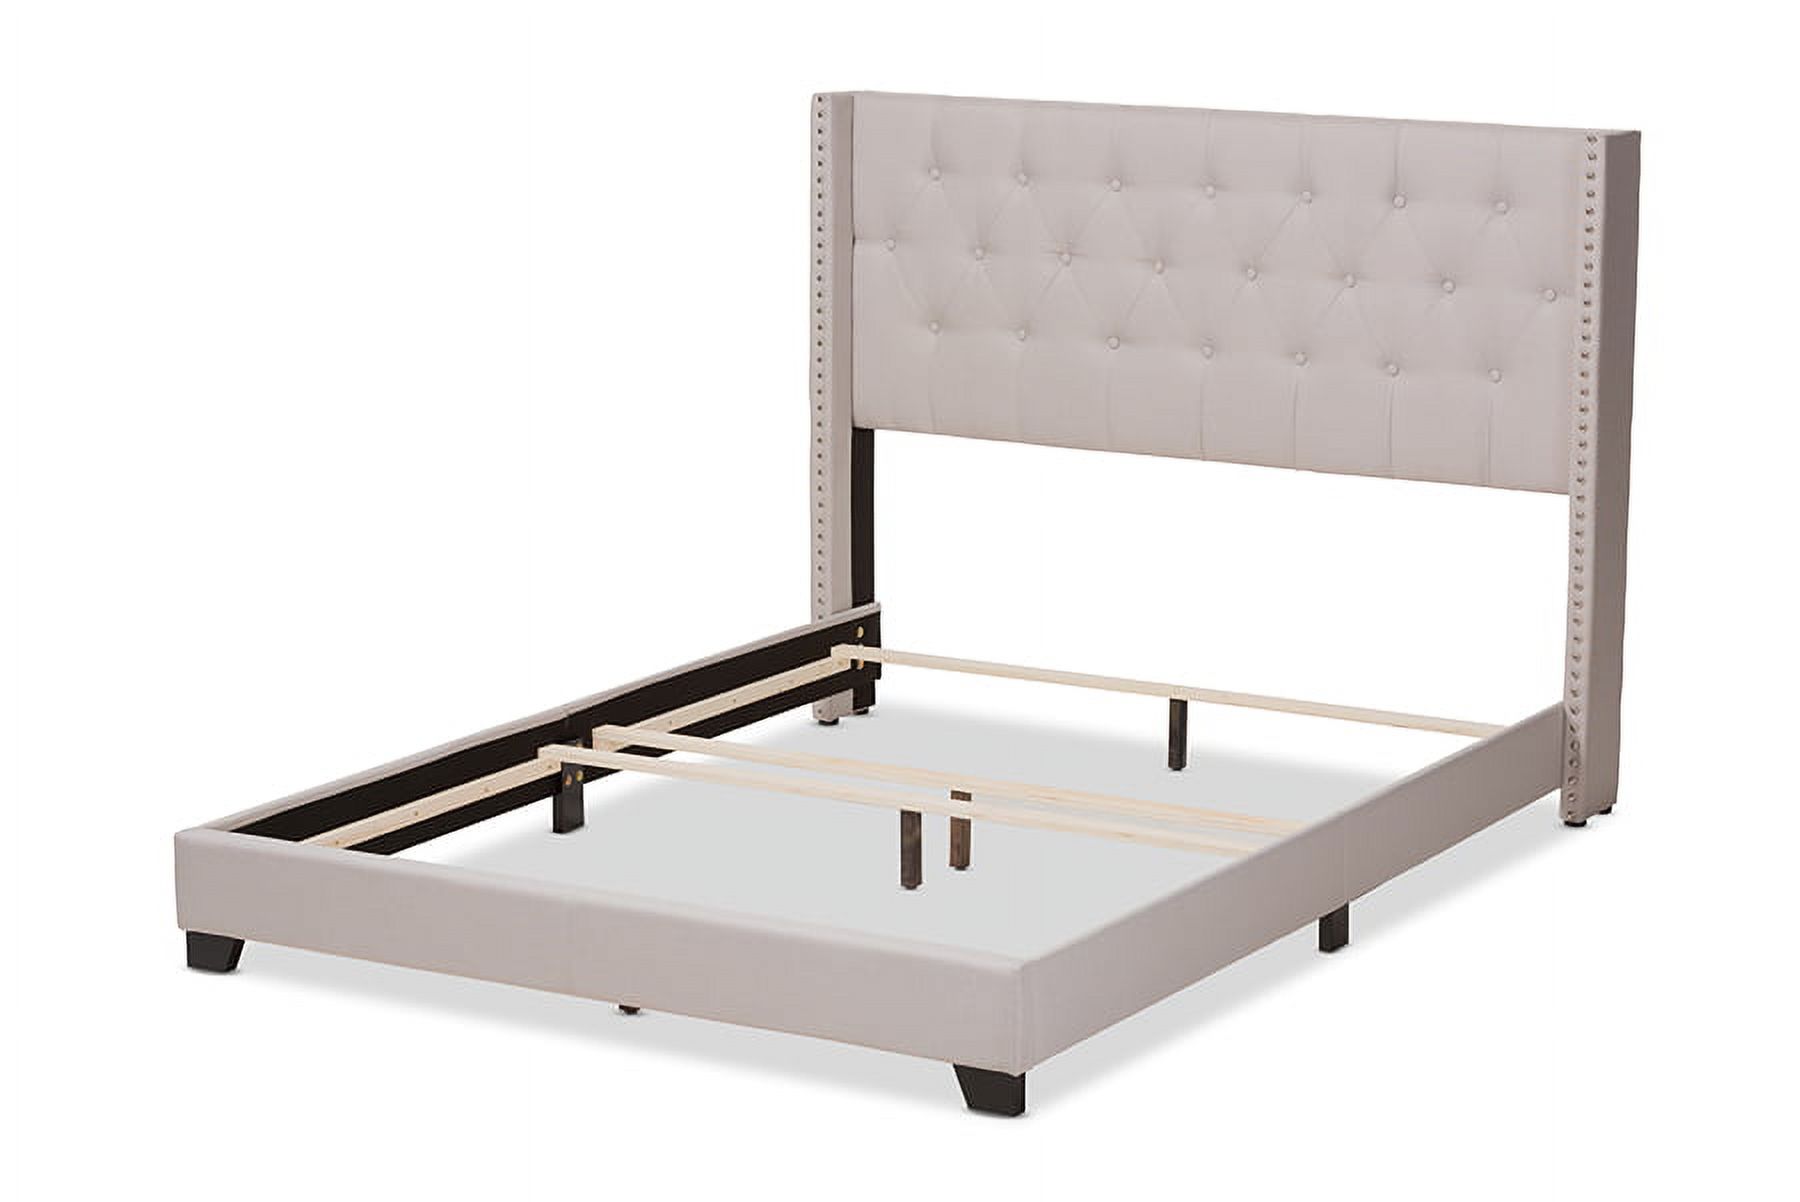 Baxton Studio Brady Modern and Contemporary Beige Fabric Upholstered Full-Size Bed - image 3 of 10